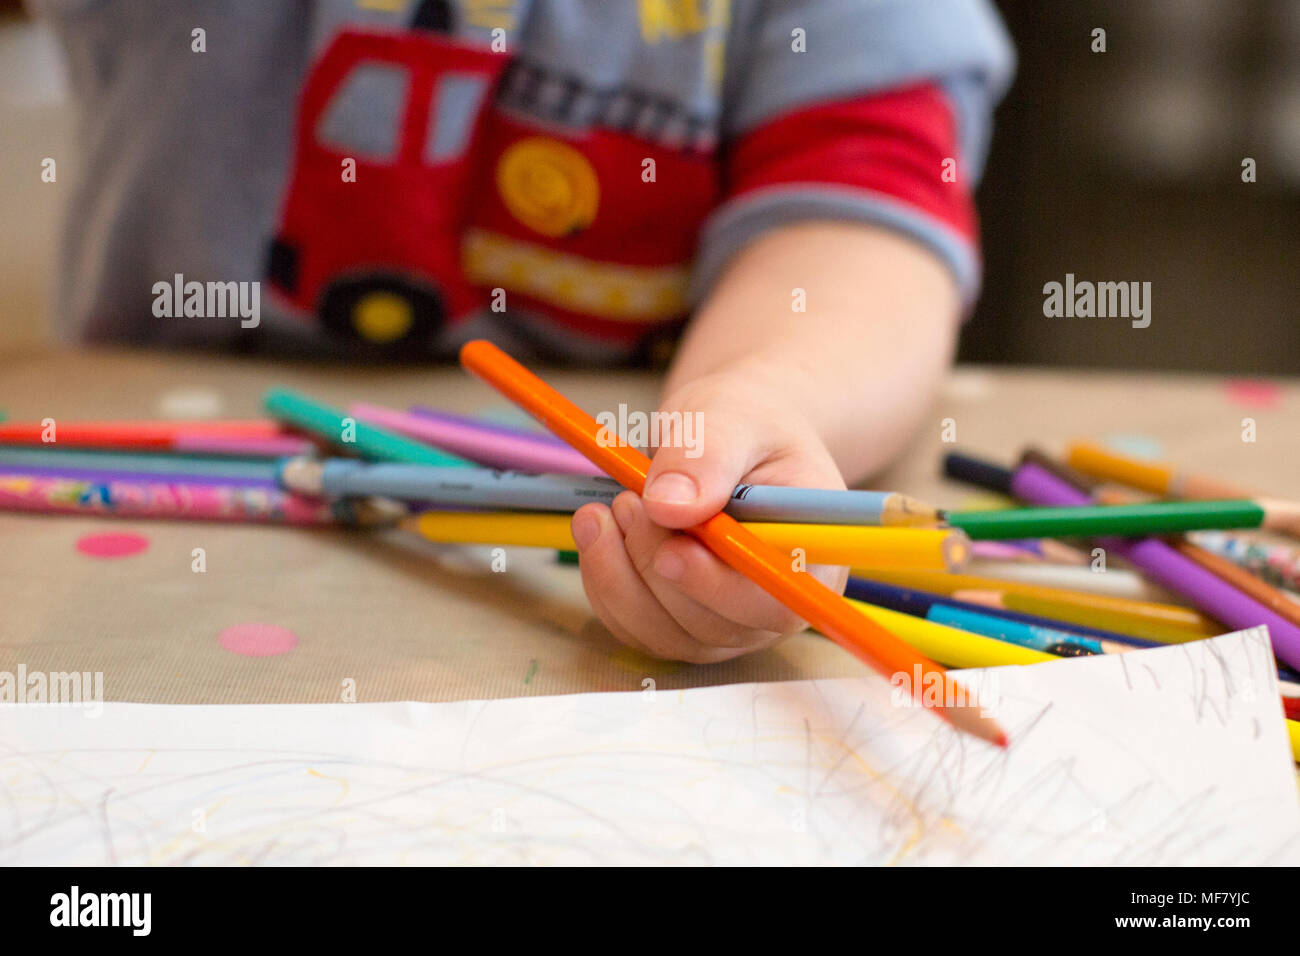 Small child drawing with pencils Stock Photo